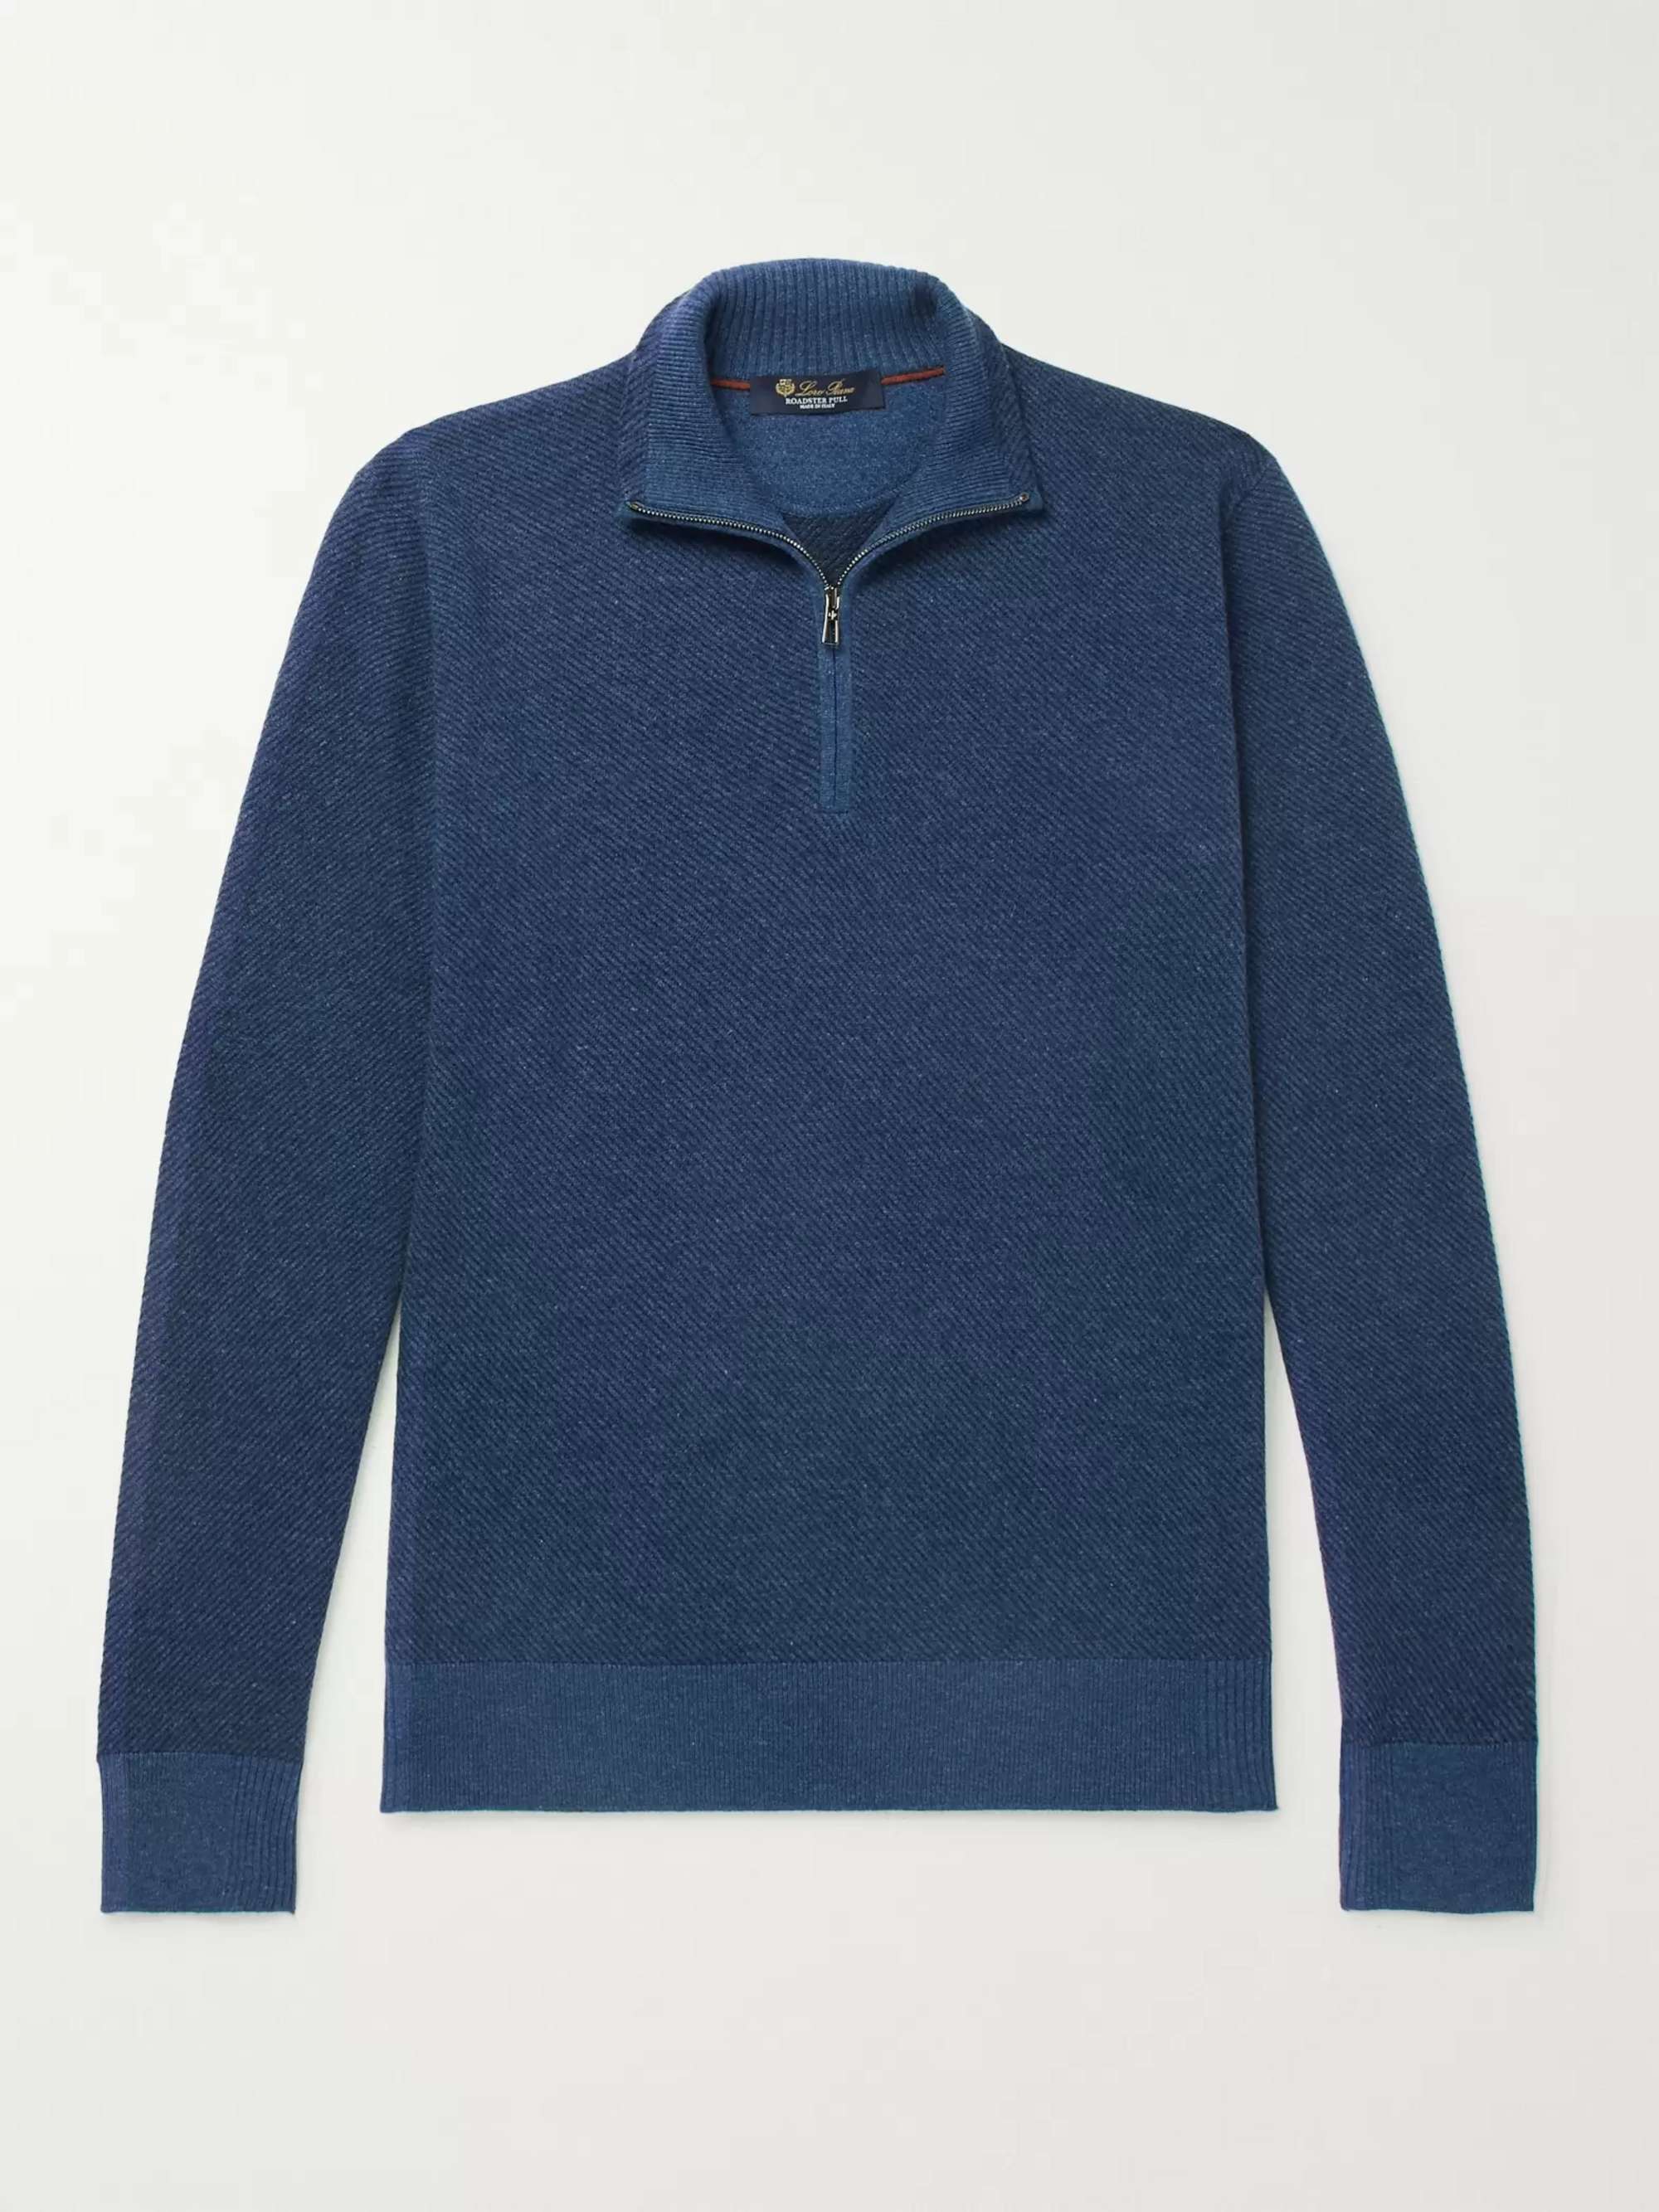 Mens Clothing Sweaters and knitwear Zipped sweaters Loro Piana Roadster Cashmere Half-zip Sweater in Blue for Men 